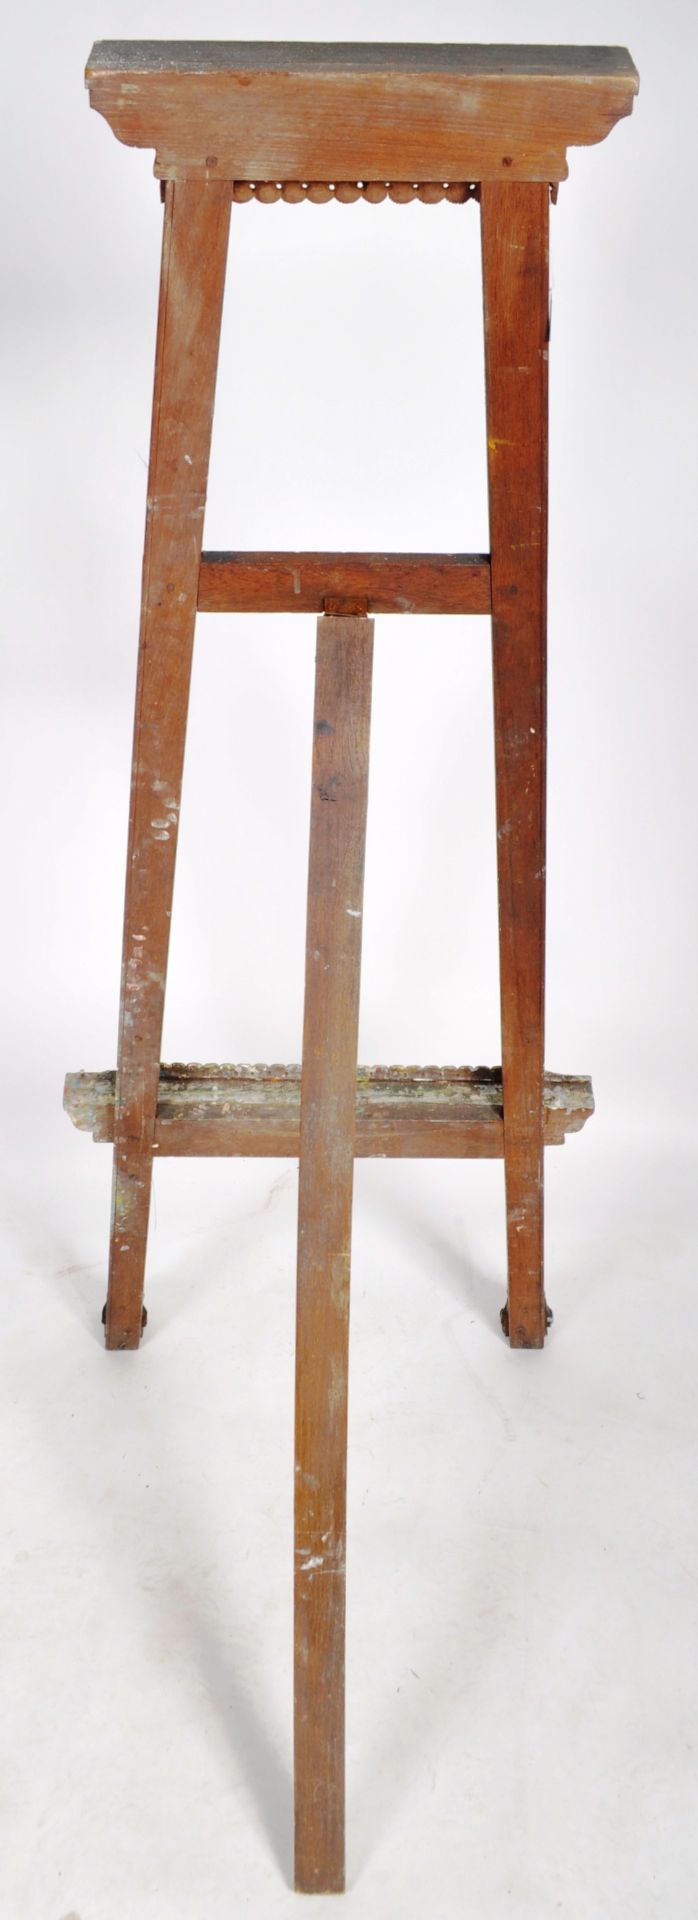 VINTAGE 20TH CENTURY ORIENTAL CARVED WOOD EASEL STAND - Image 12 of 13